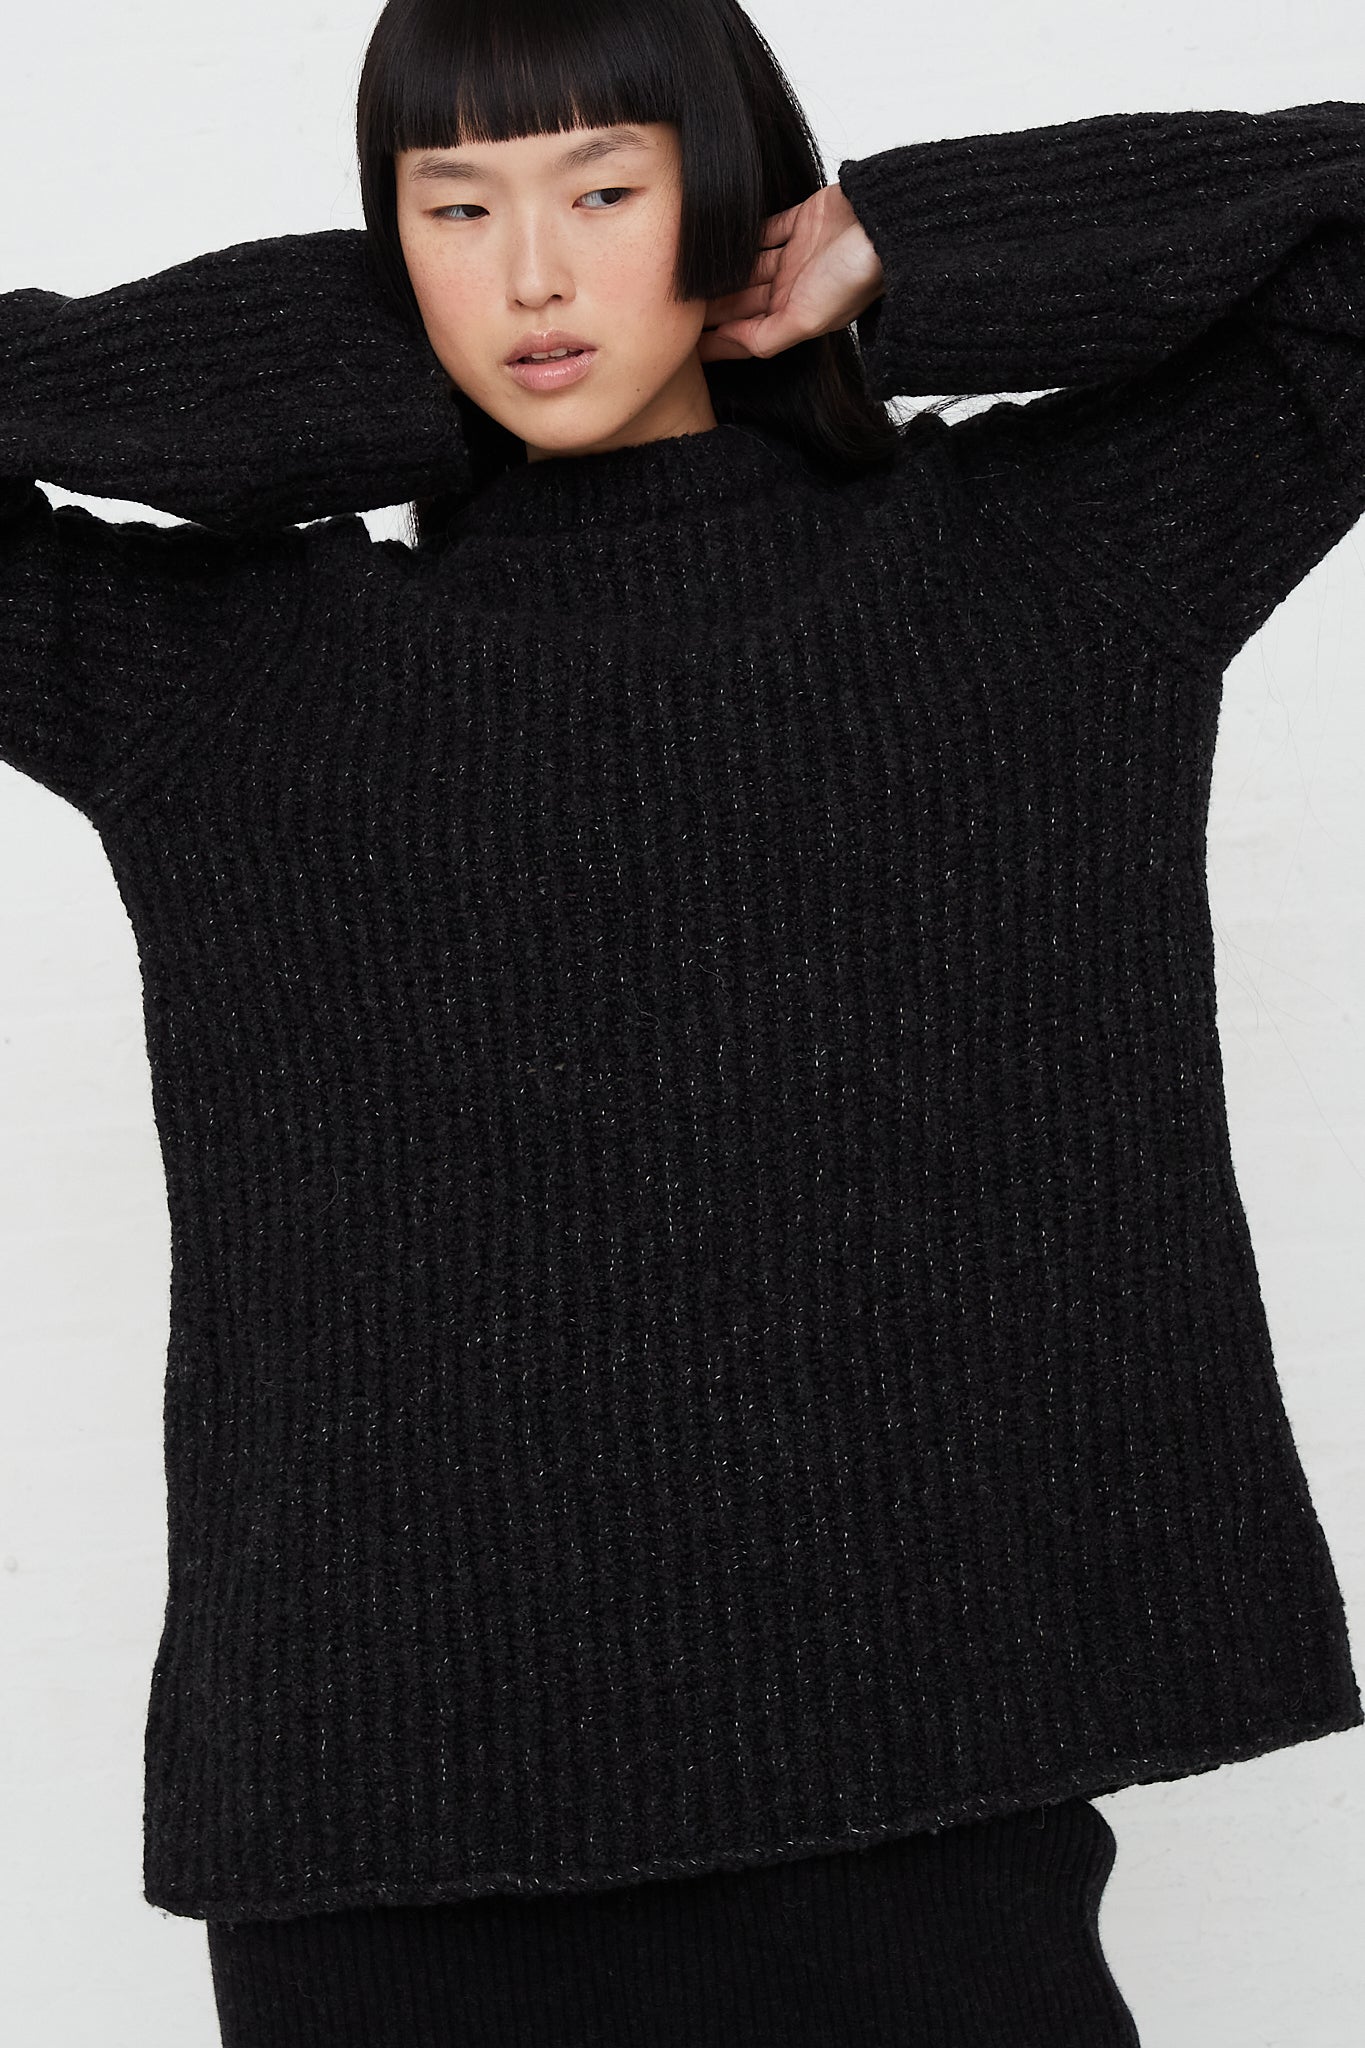 Ladders Merino Crewneck Sweater in Black by Lauren Manoogian for Oroboro Front Upclose